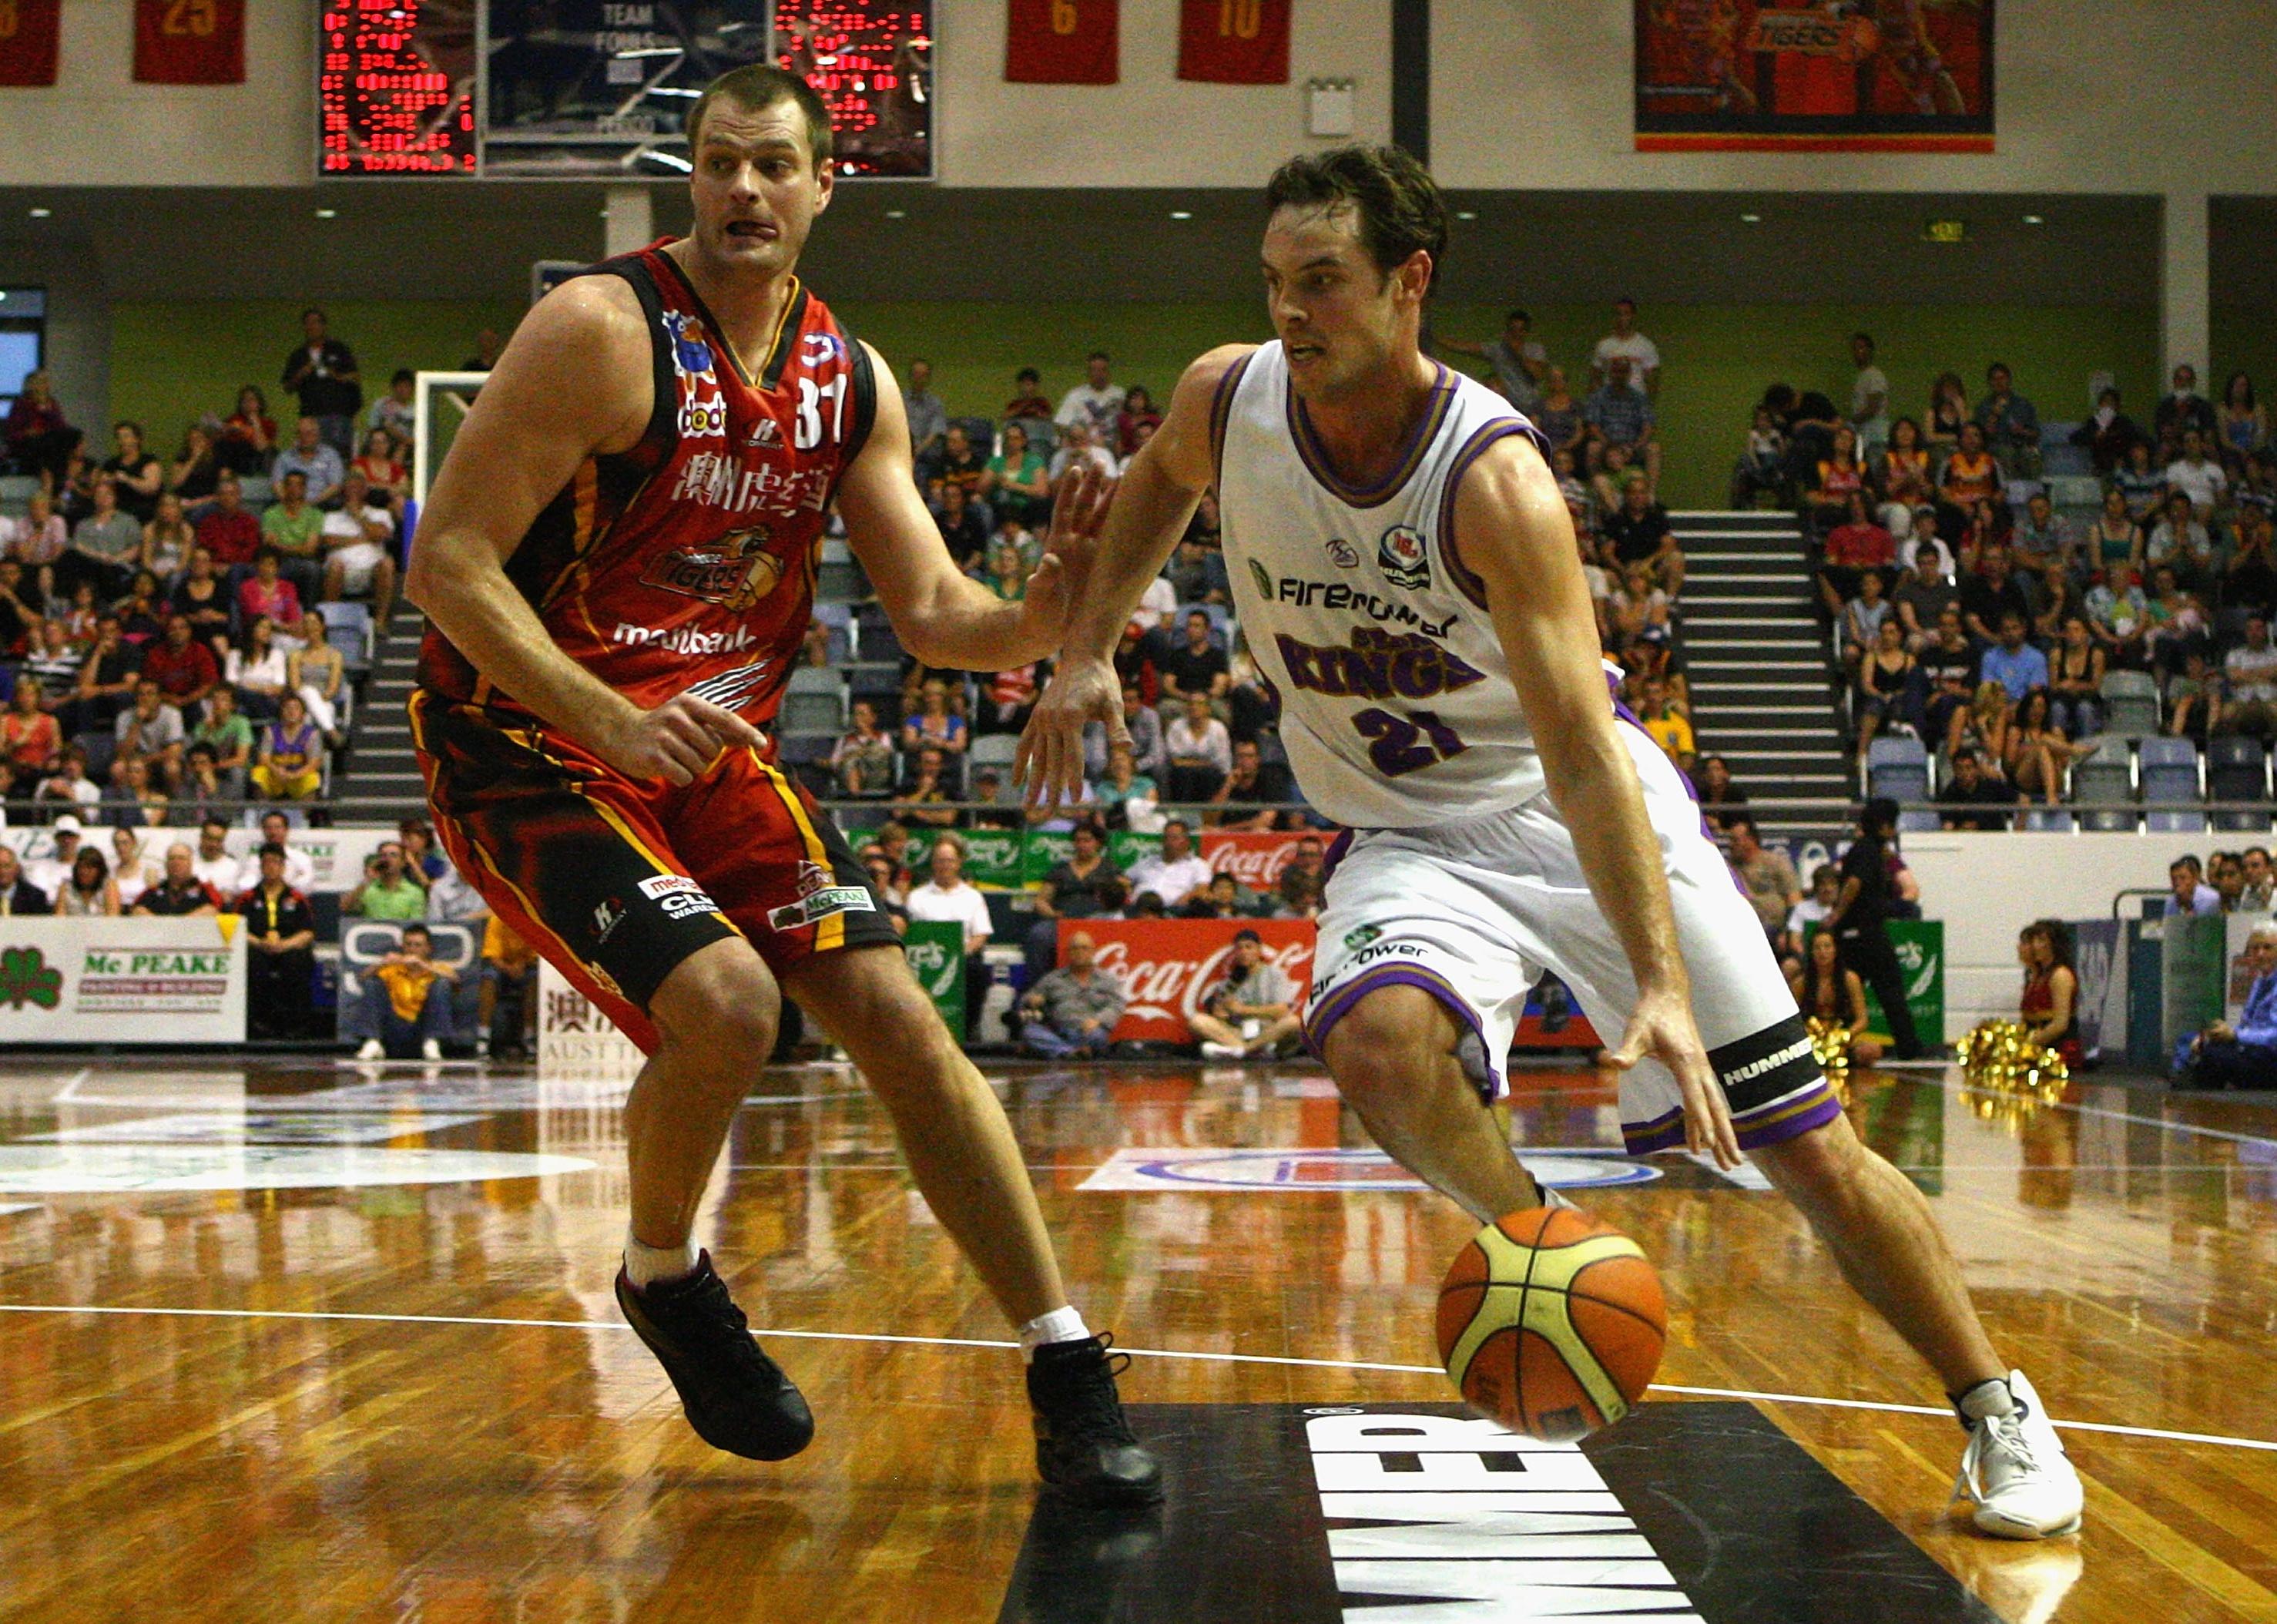 Martin Muursepp puts pressure on an opposing player during a game.